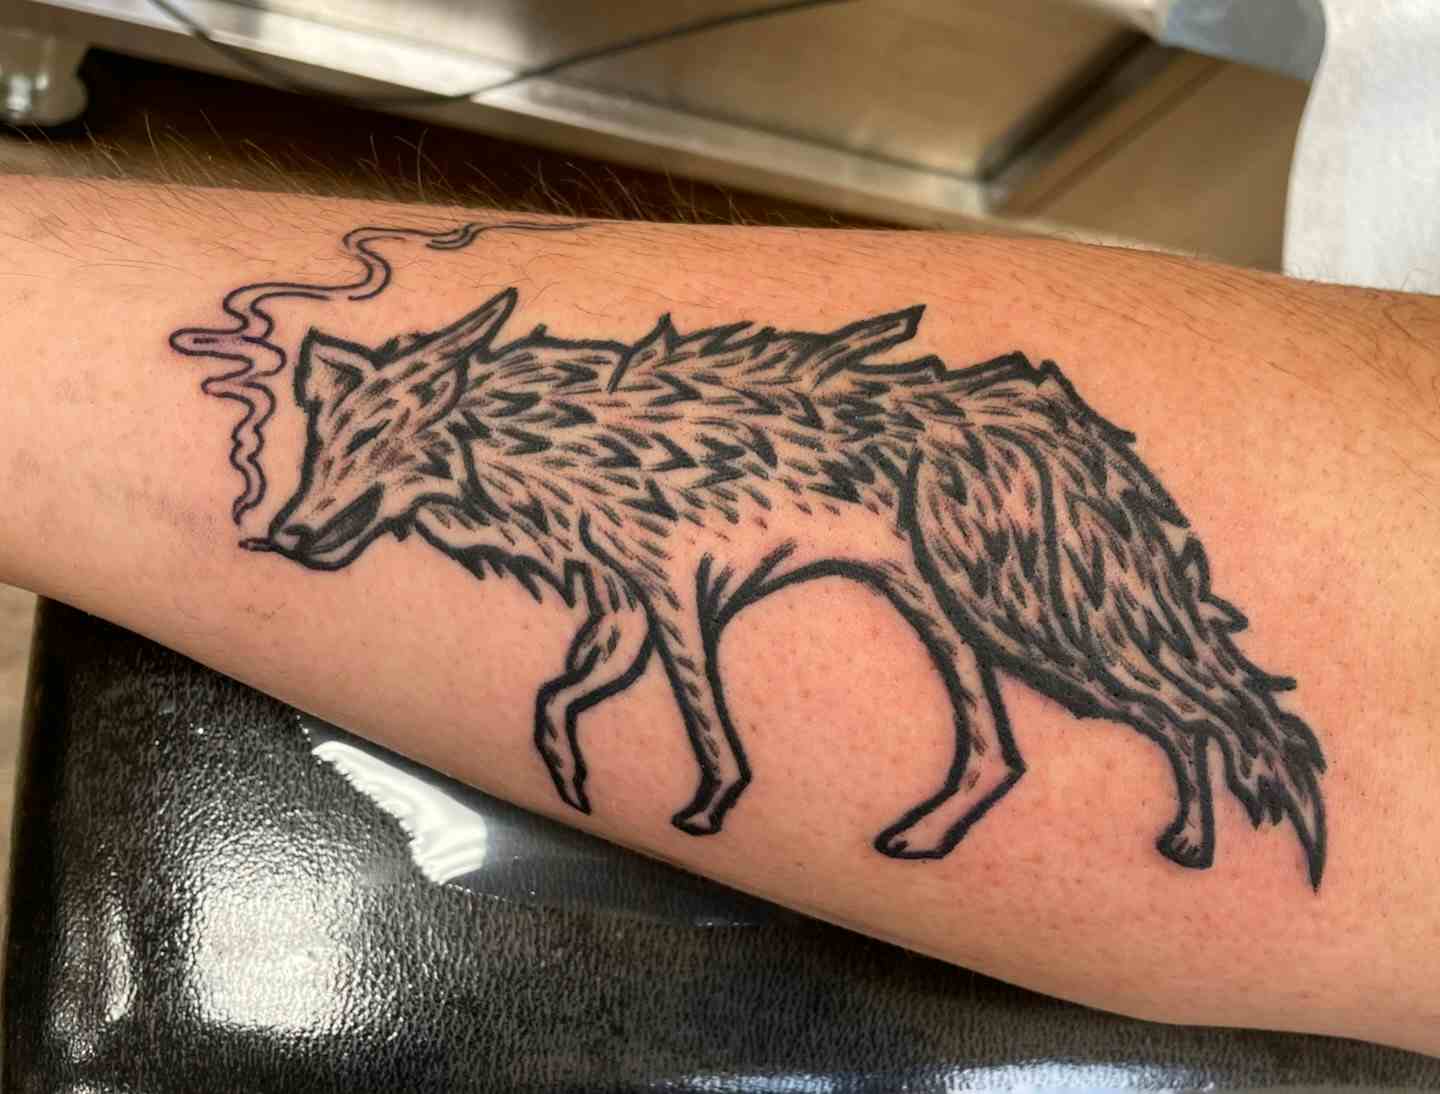 Colter wall smoking coyote tattoo